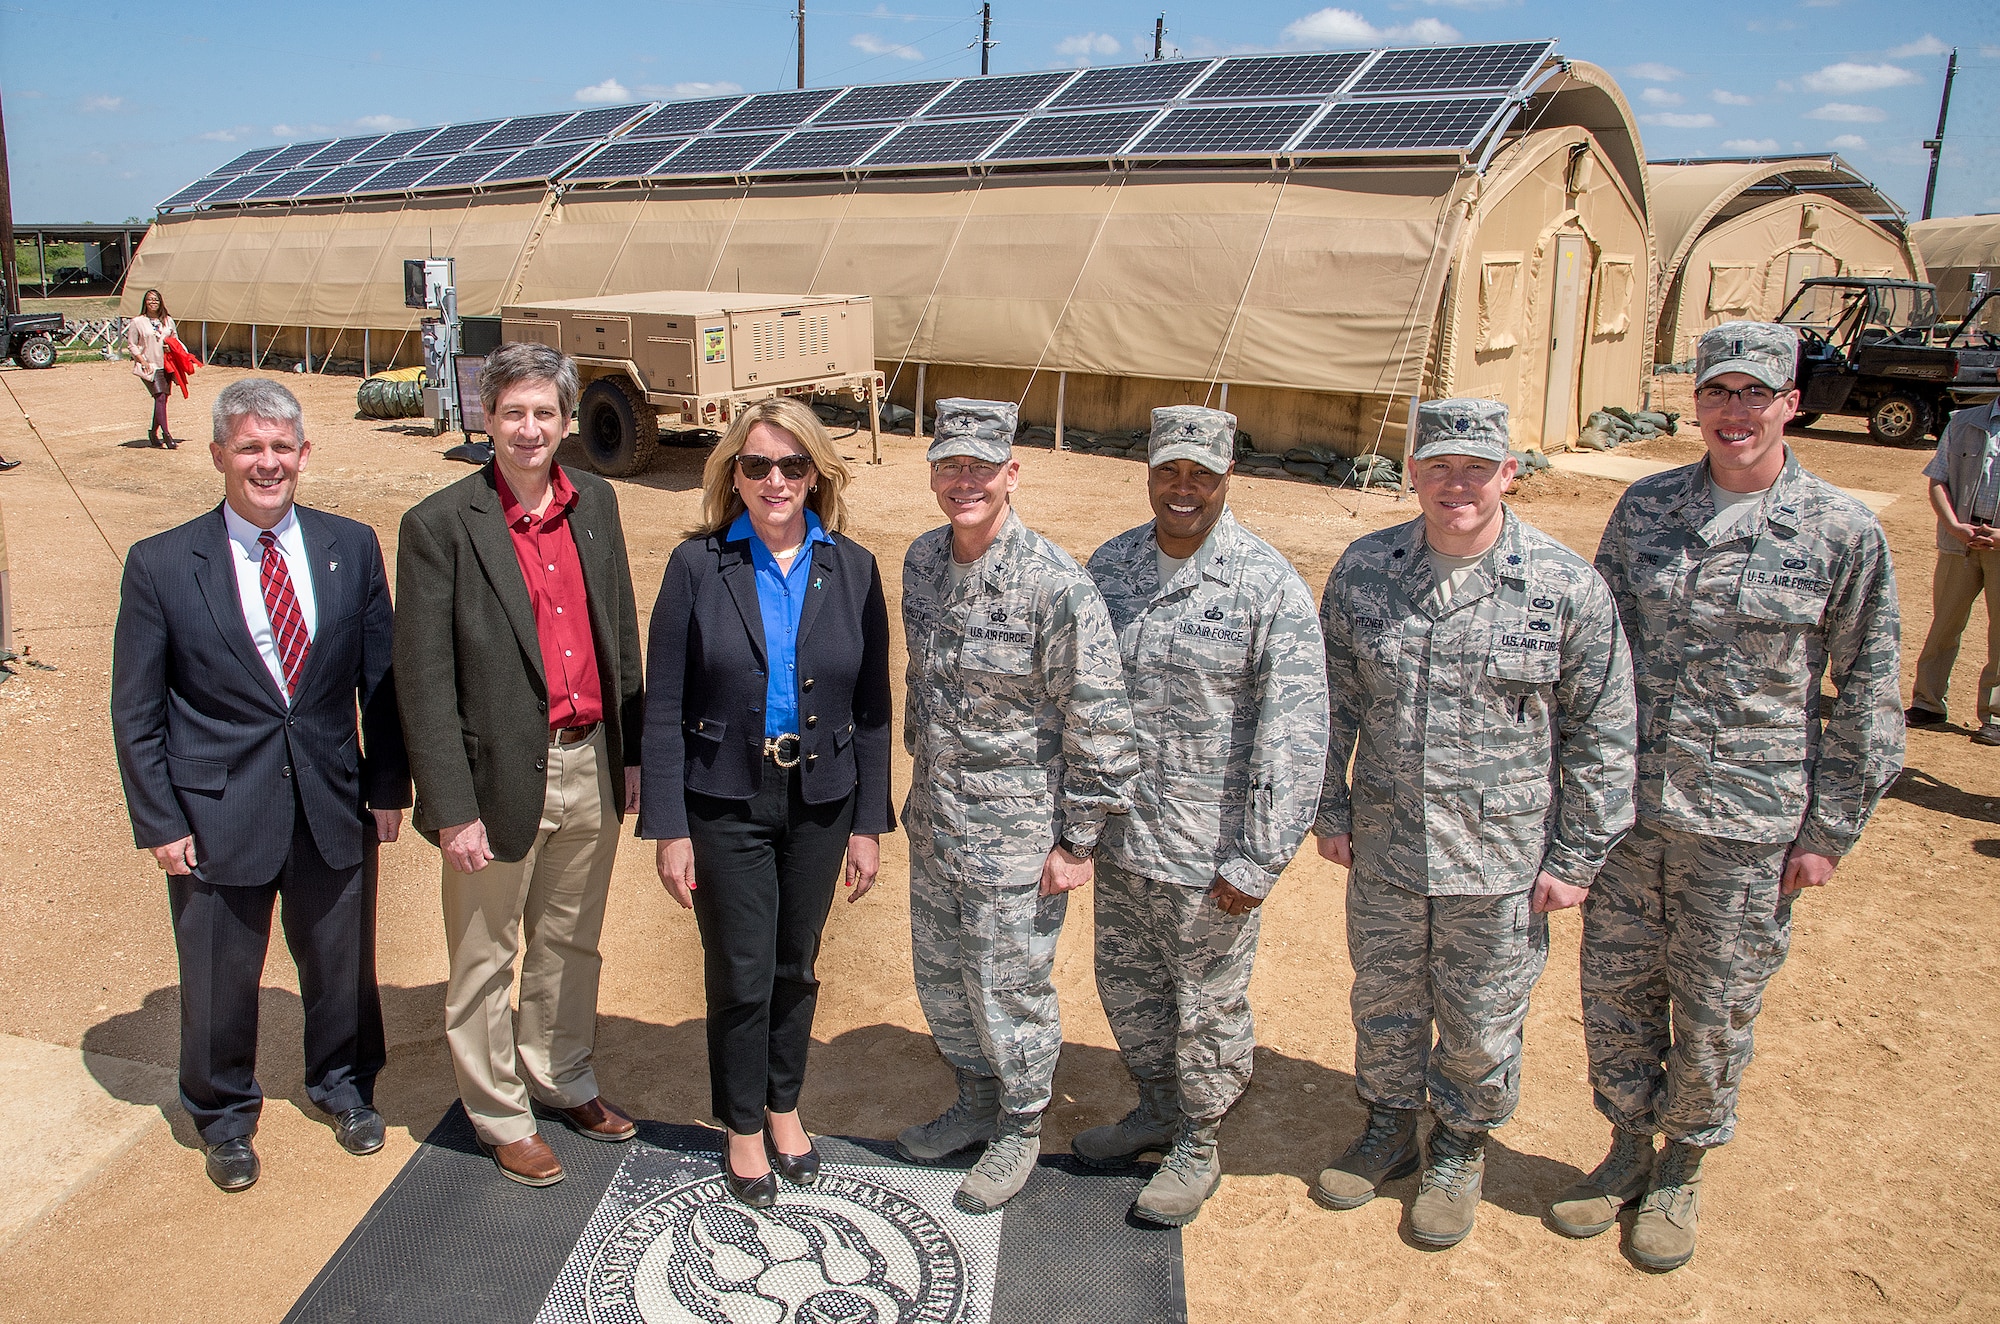 Air Force Secretary Deborah Lee James tours AFRL's FOB of the Future at Joint Base San Antonio’s Basic Expeditionary Airmen Skills Training facility on March 22, 2016. Pictured from left to right are:  Thomas Lockhart, Director, Materials and Manufacturing Directorate, AFRL; Mark Correll, Deputy Assistant Secretary of the Air Force for Environment, Safety and Infrastructure; Deborah Lee James, Secretary of the Air Force; Brig. Gen. Robert LaBrutta, Commander, 502nd Air Base Wing and Joint Base San Antonio, Texas; Brig. Gen. Trent Edwards, Commander, 37th Training Wing, Joint Base San Antonio, Texas; Lt. Col. Scott Fitzner, Chief, Acquisition Systems Support Branch, Materials and Manufacturing Directorate, AFRL; 1st Lt.Jason Goins, Project Engineer, Acquisition Systems Support Branch, Materials and Manufacturing Directorate, AFRL. (U.S. Air Force Photo/Staff Sergeant Marissa Garner)